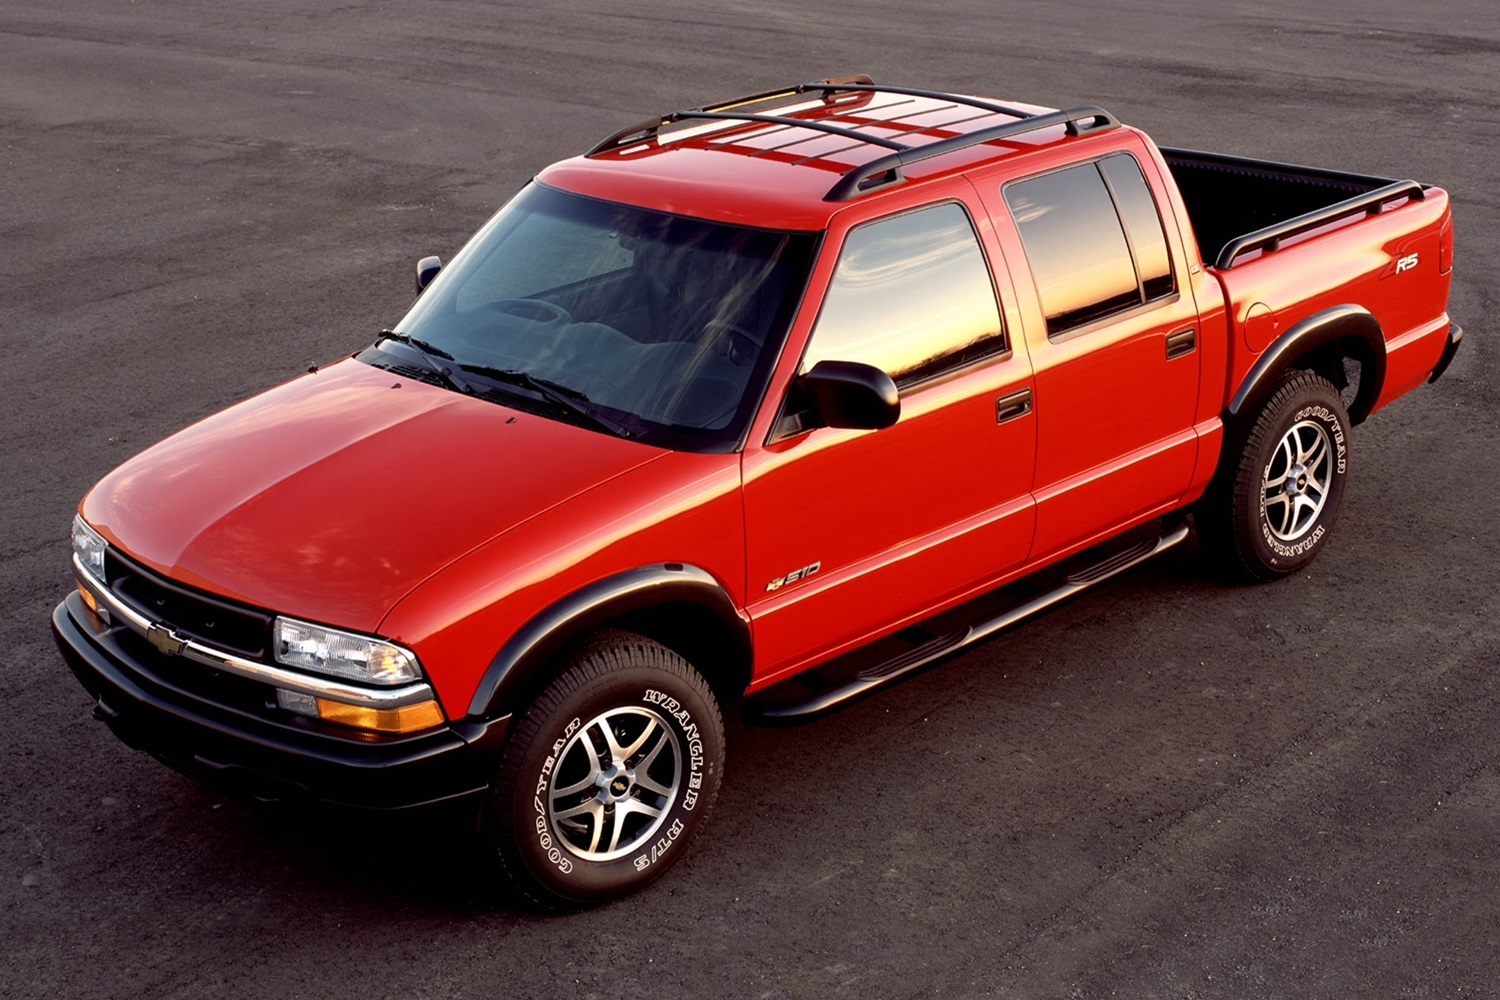 Chevrolet S10 And S-10 Info, Specs, Pictures, Wiki | GM Authority